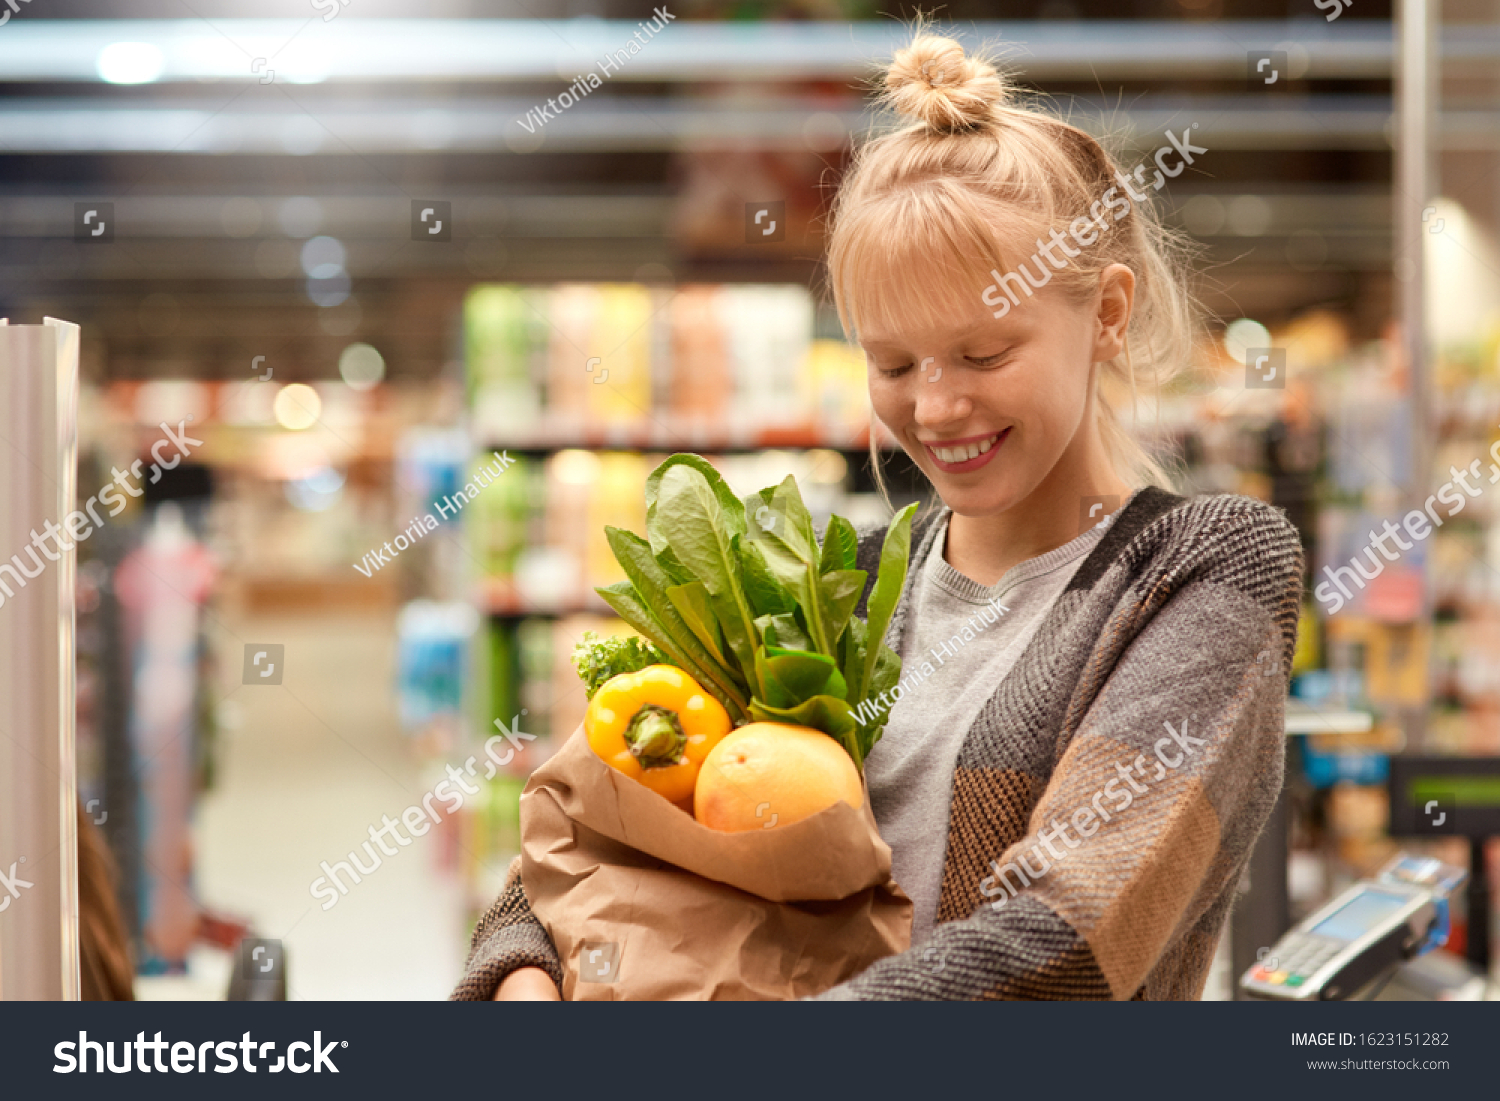 Young woman at the supermarket standing holding paper bag with shoppings fresh organic vegetables looking down laughing happy close-up just walk out shopping technology #1623151282